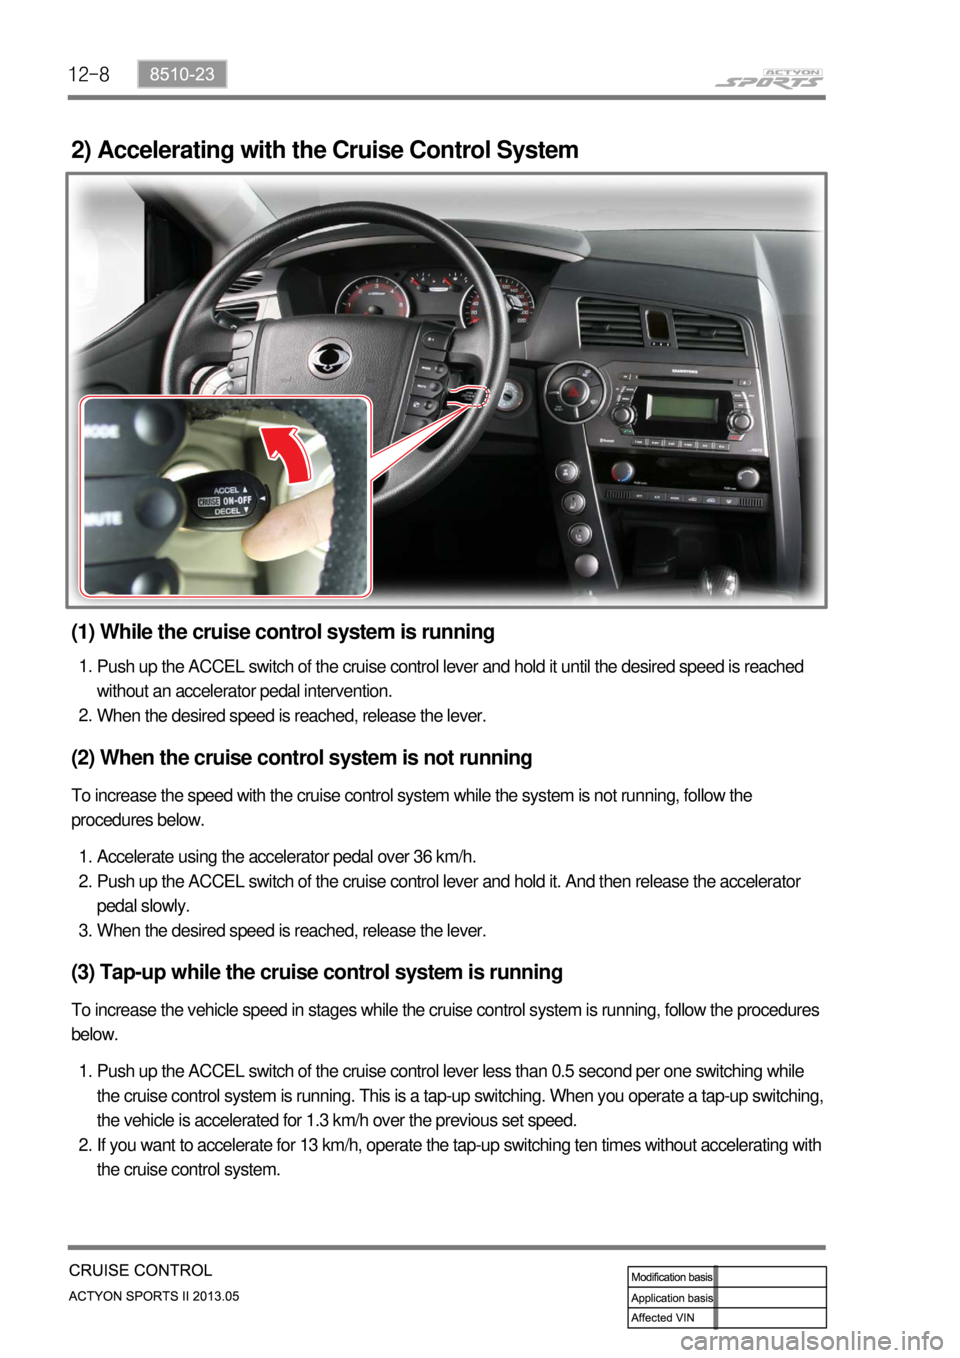 SSANGYONG NEW ACTYON SPORTS 2013  Service Manual 12-8
2) Accelerating with the Cruise Control System
(1) While the cruise control system is running
Push up the ACCEL switch of the cruise control lever and hold it until the desired speed is reached 
